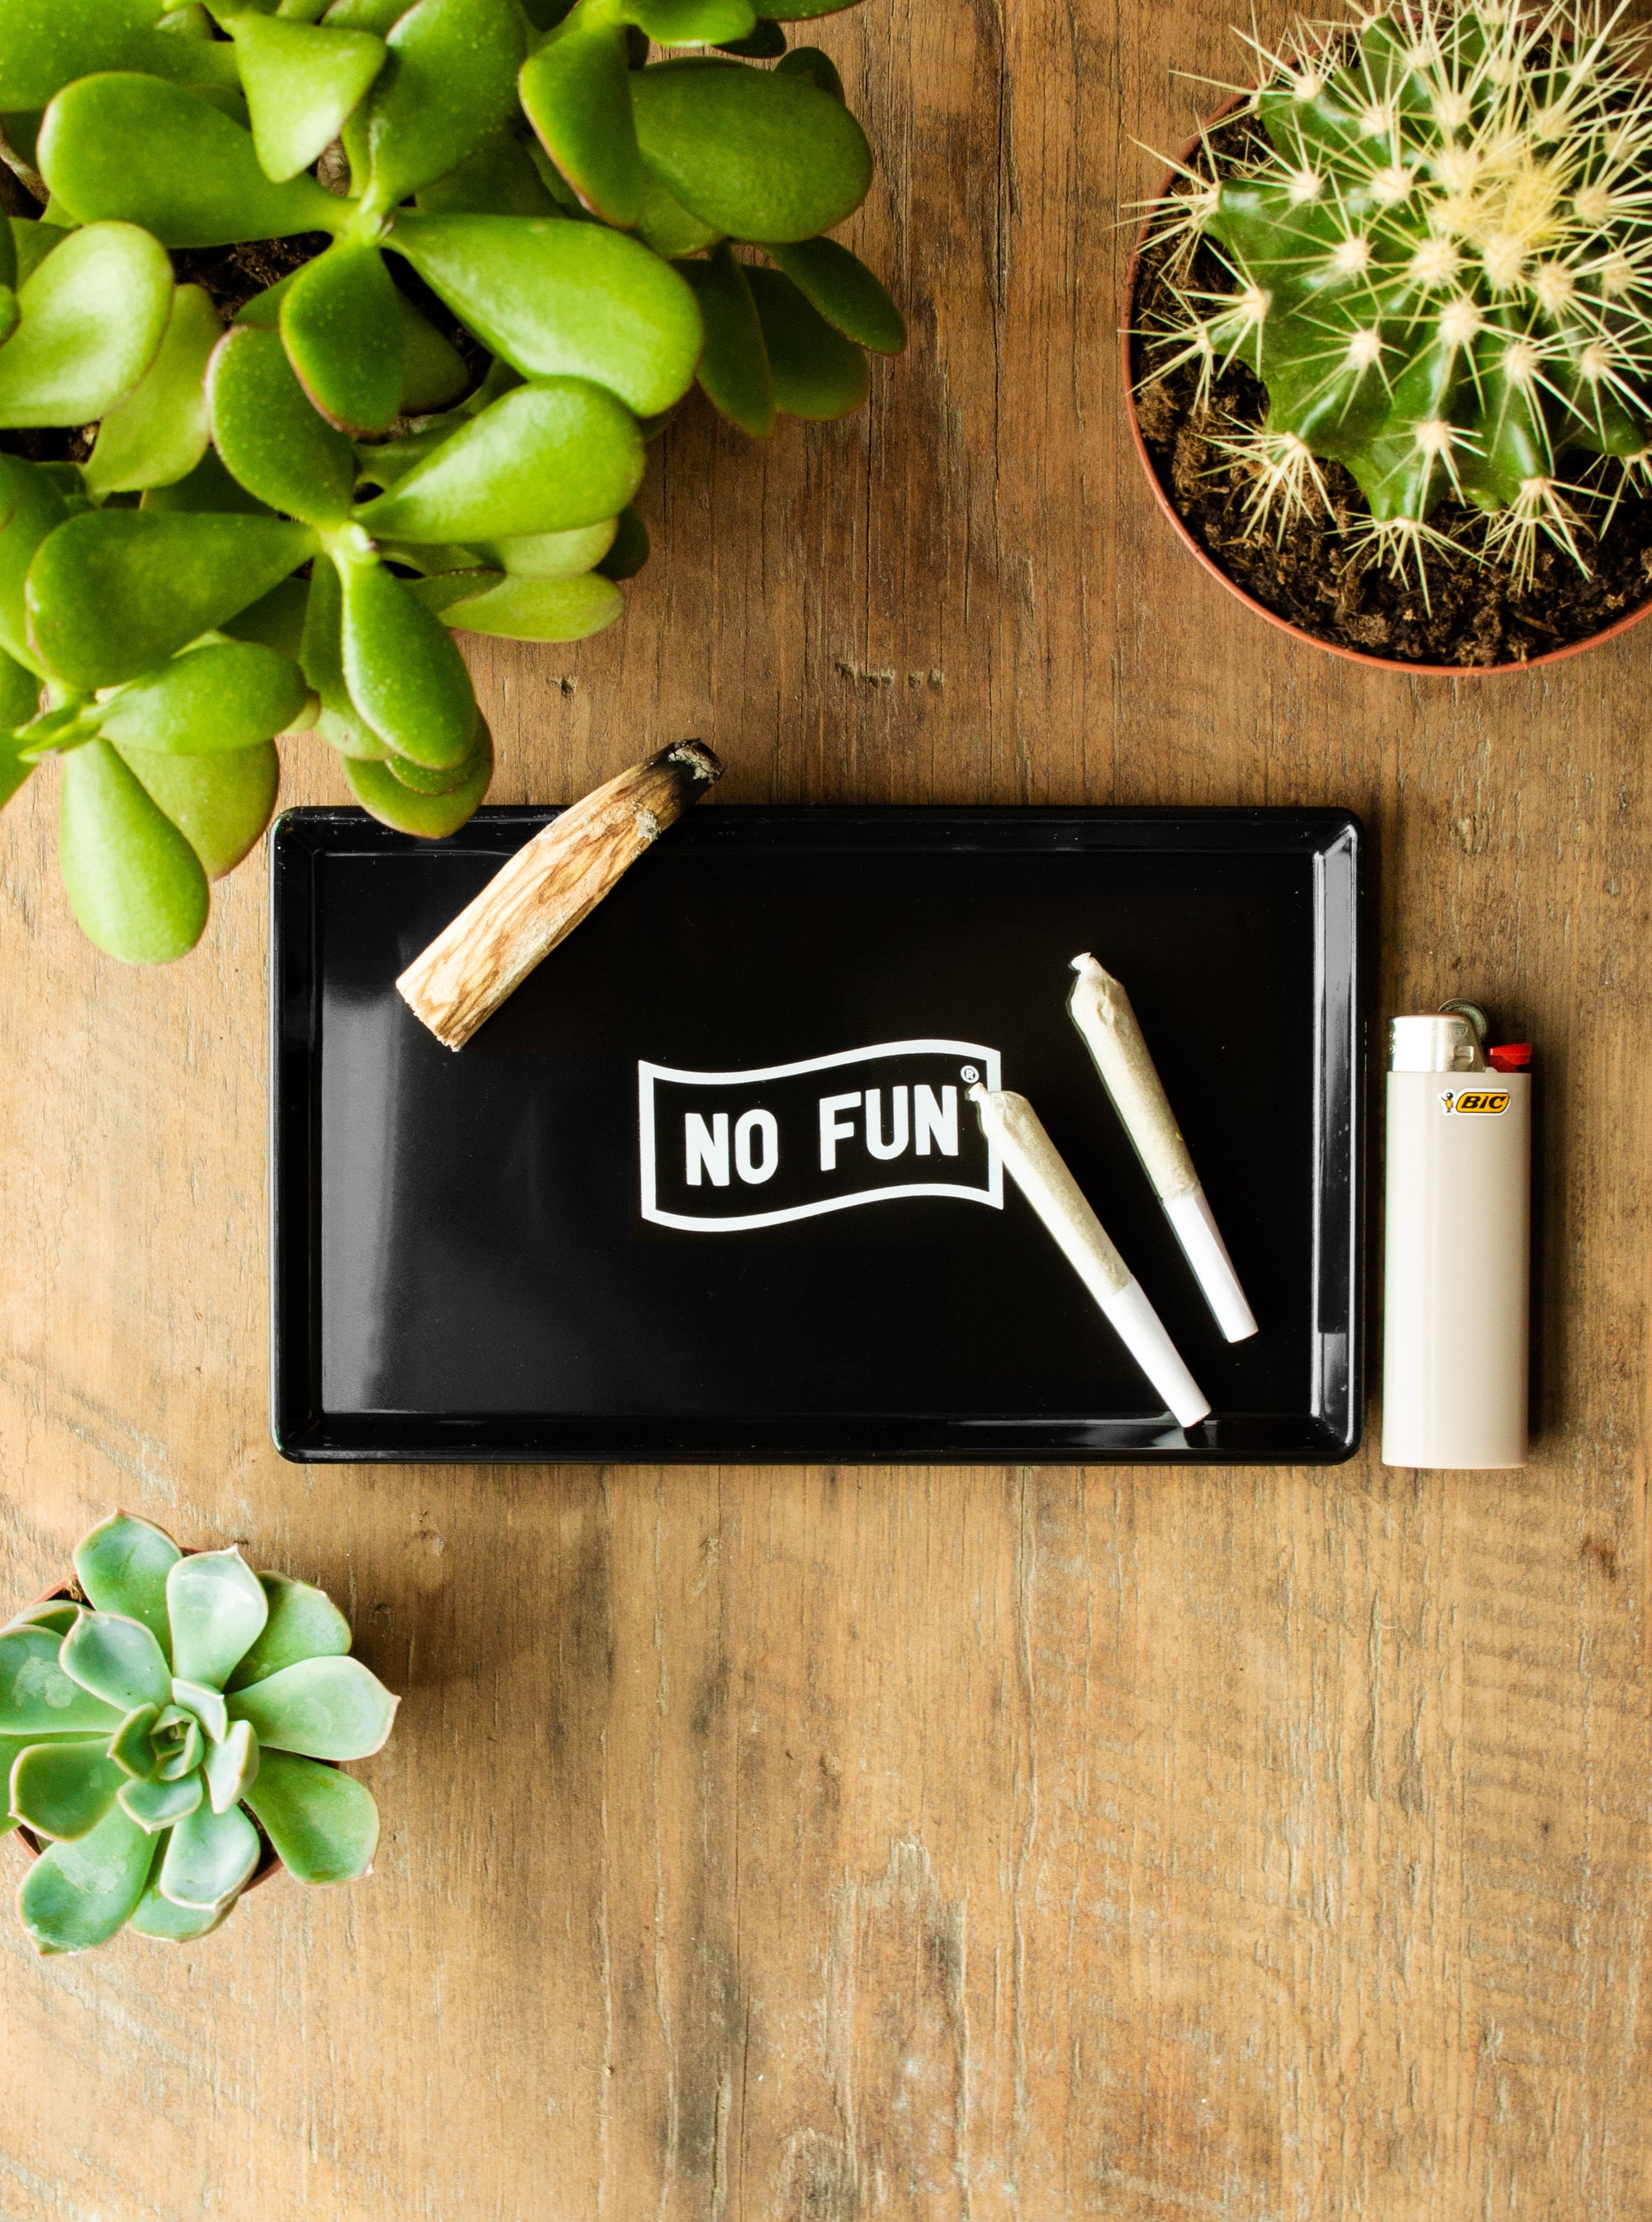 The No Fun® Multi-Purpose Tray on a wooden table.  The tray is surrounded by various succulents.  There is a grey lighter on the right side of the tray.  There are 2 joints, and a piece of Palo Santo laying in the tray.